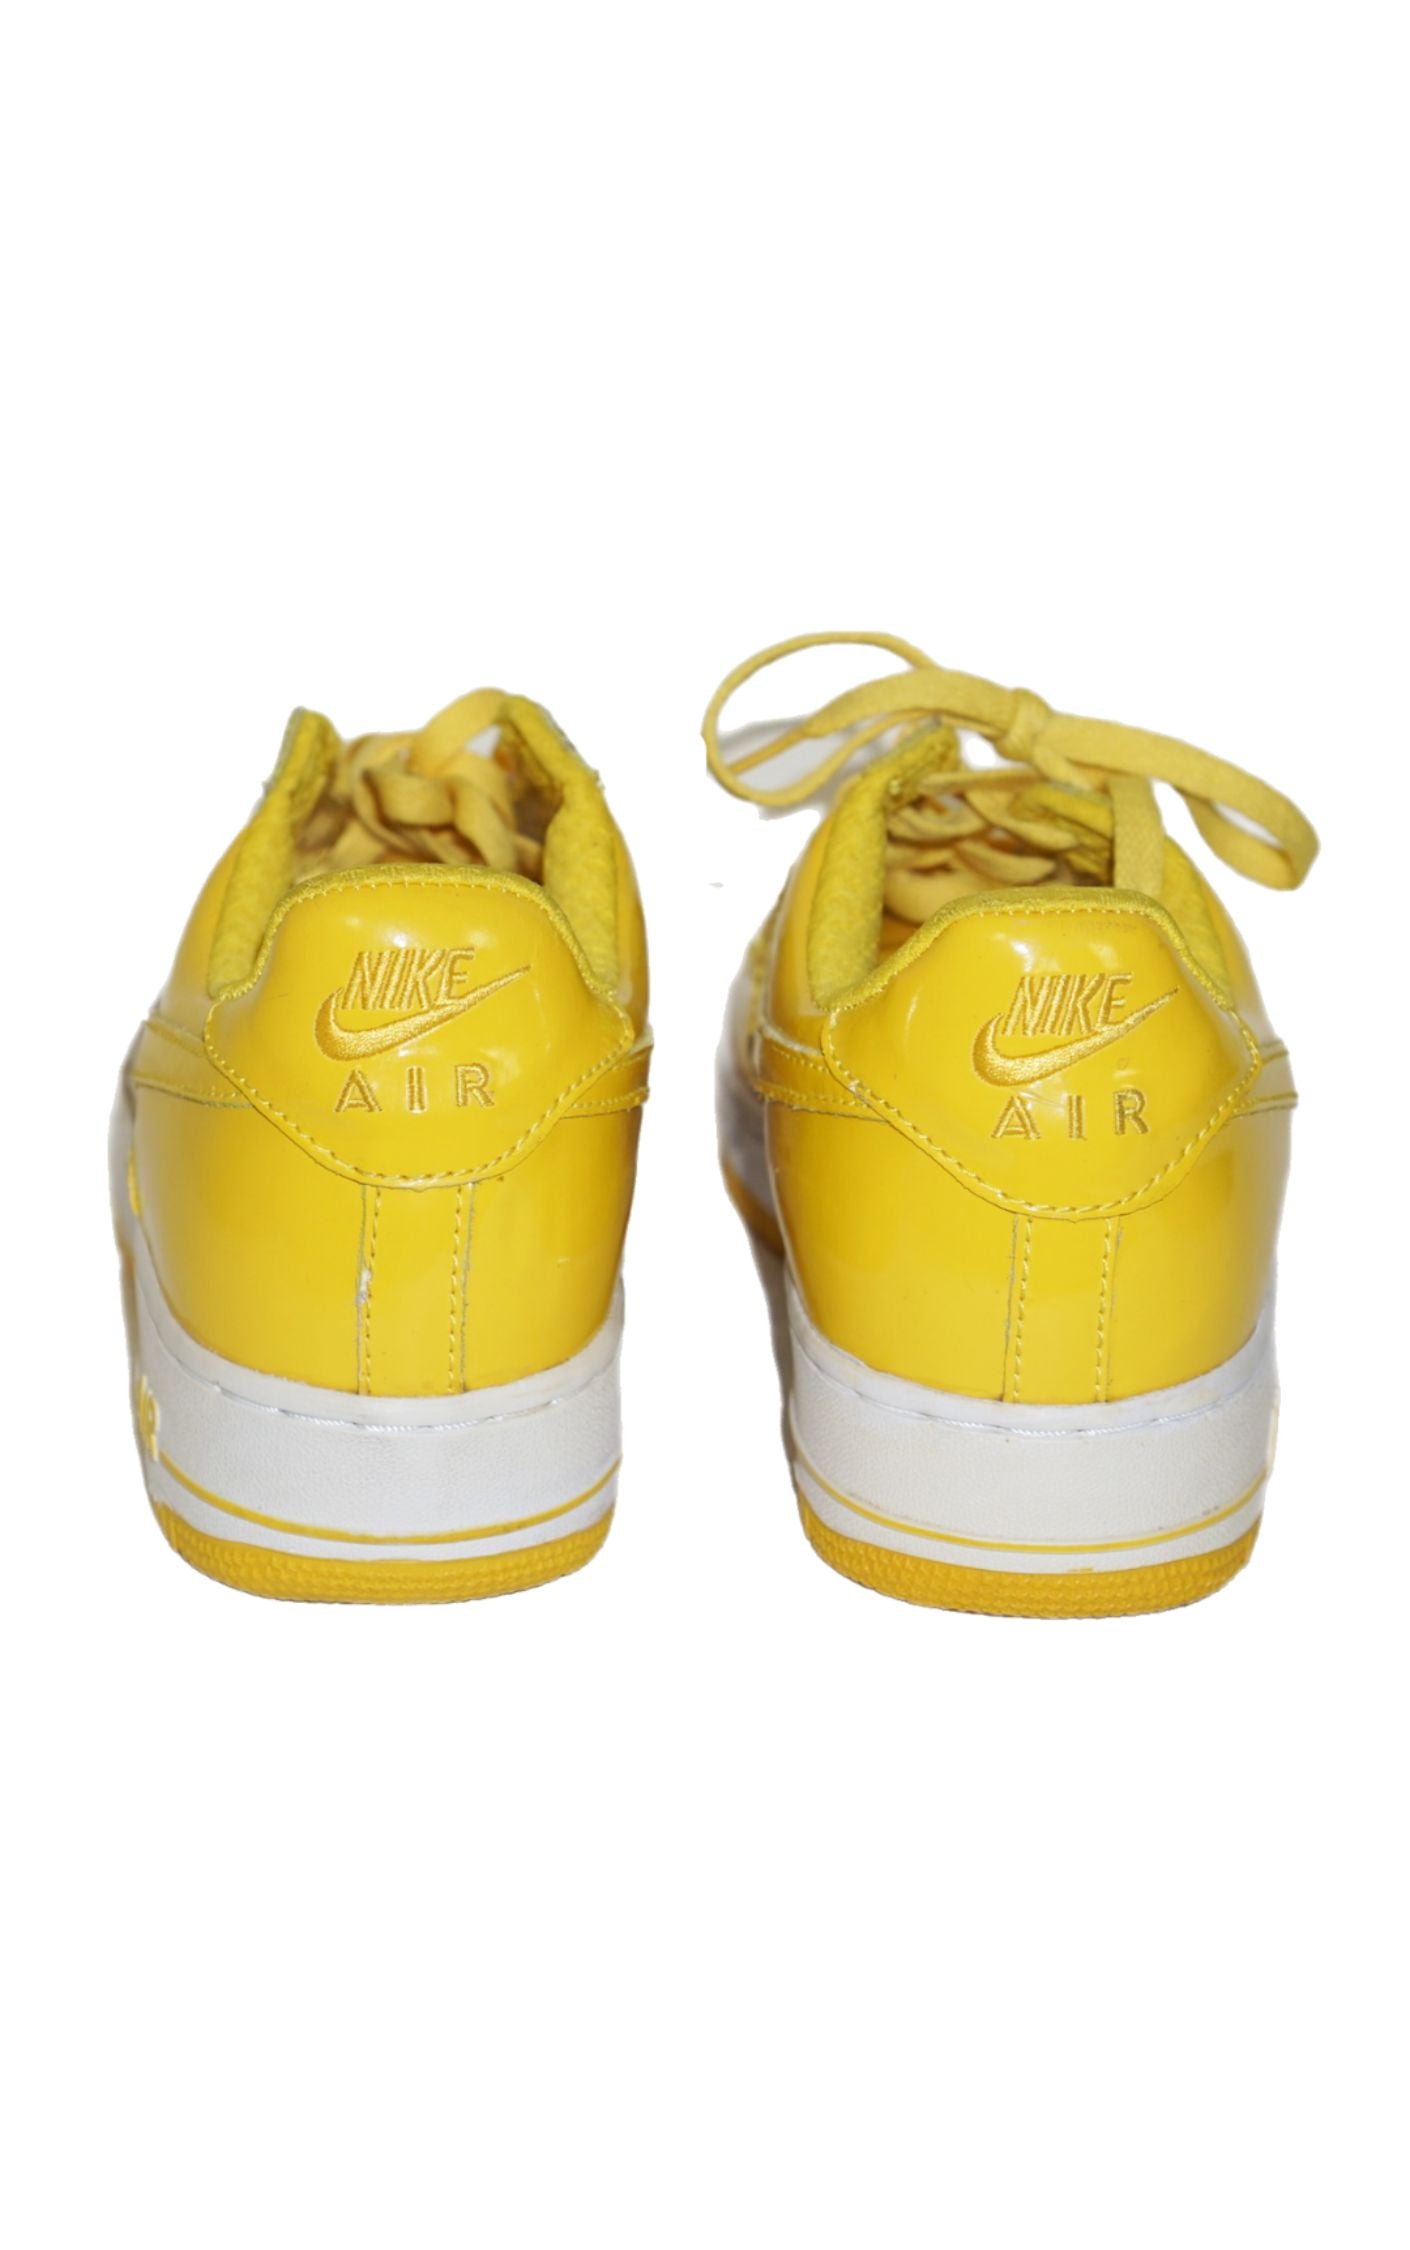 NIKE AF 1 Invisible Clear Transparent Yellow Sneakers resellum